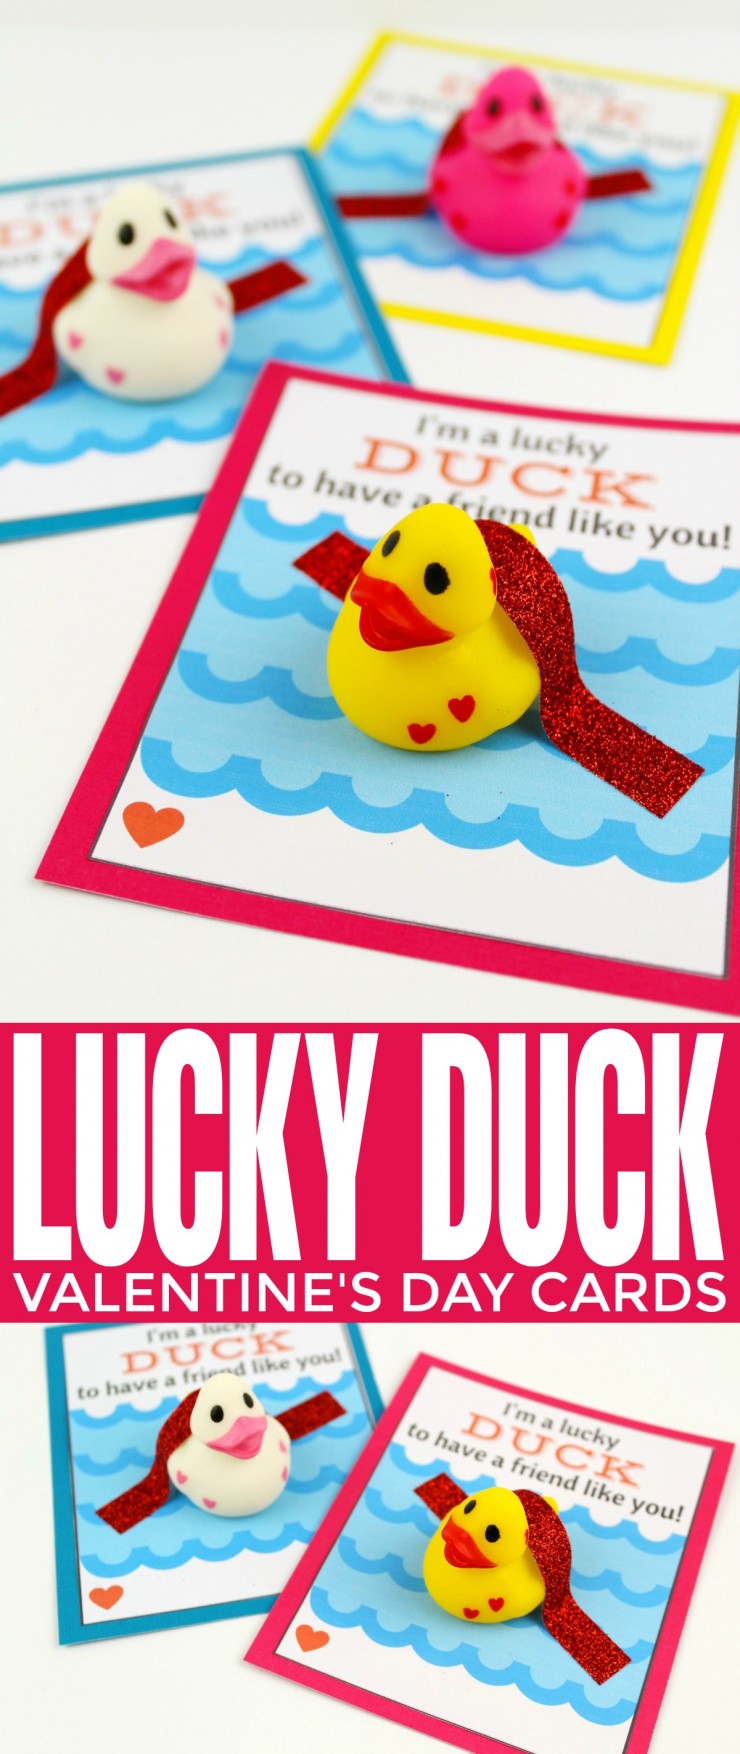 These lucky duck valentine's day cards are super cute and perfect for classroom valentines! What a great way for your child to let their friends know they care!